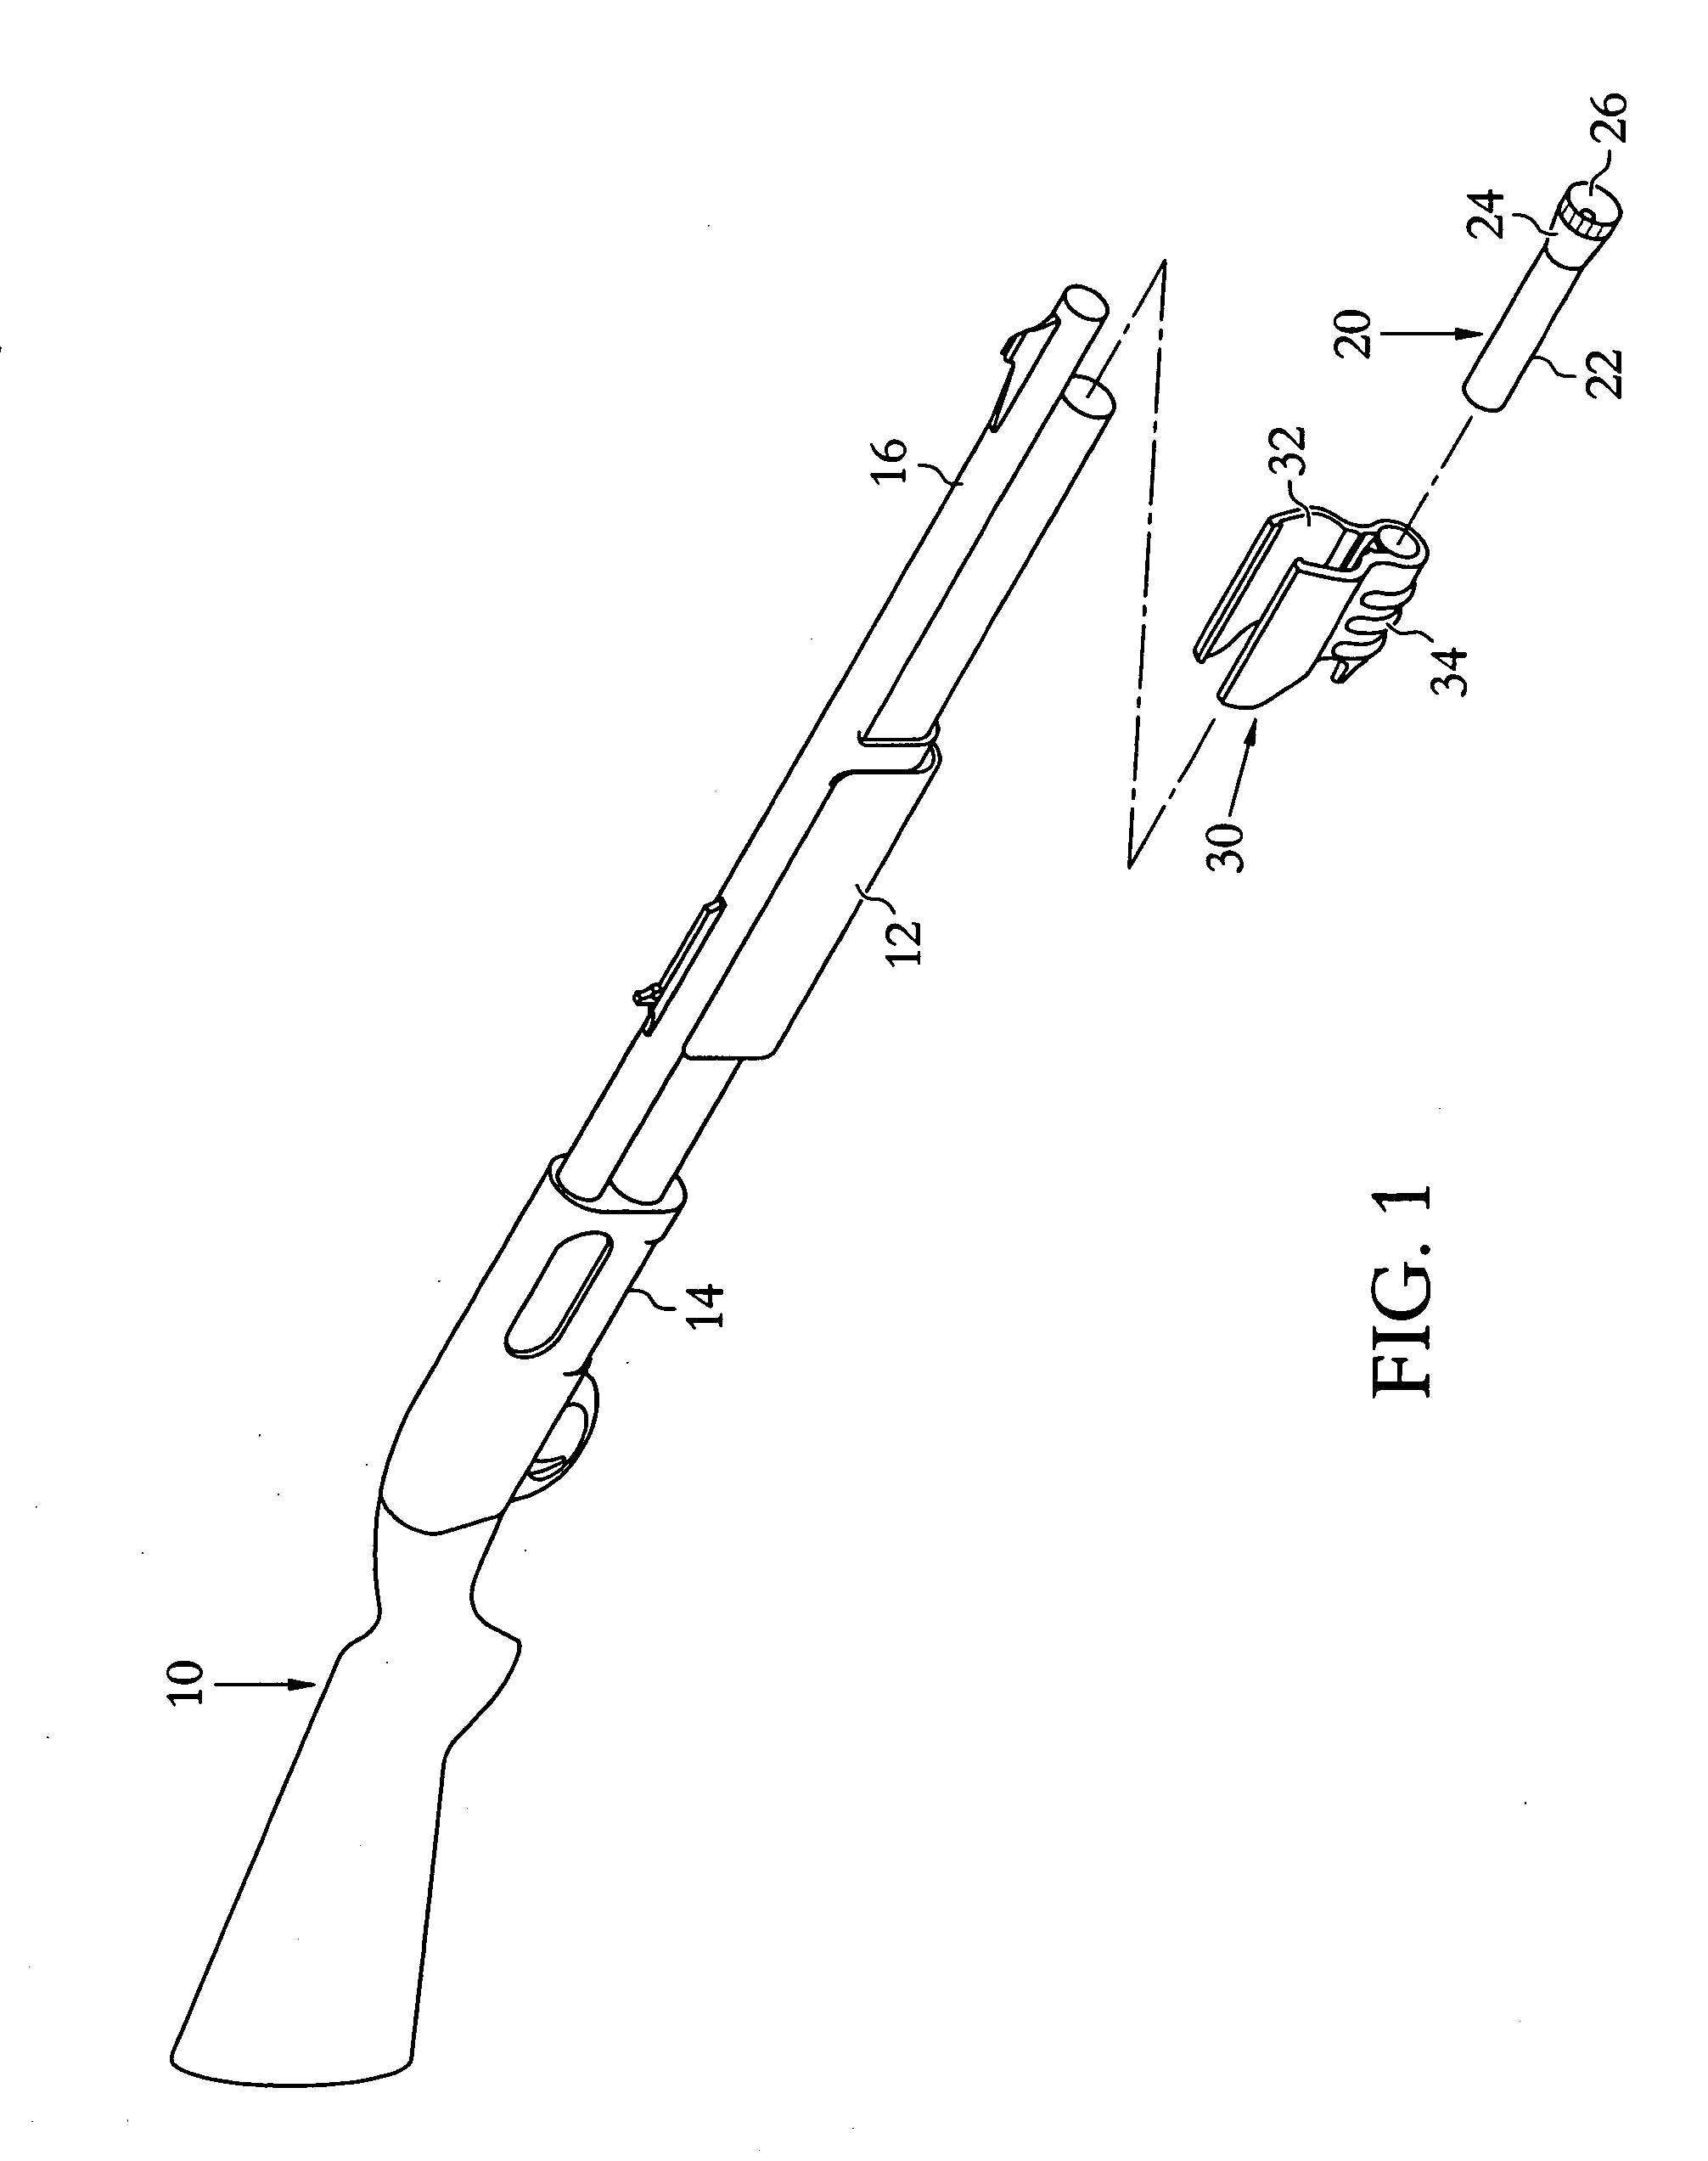 Removable integrated target-illuminating device holder and grip apparatus and method thereof